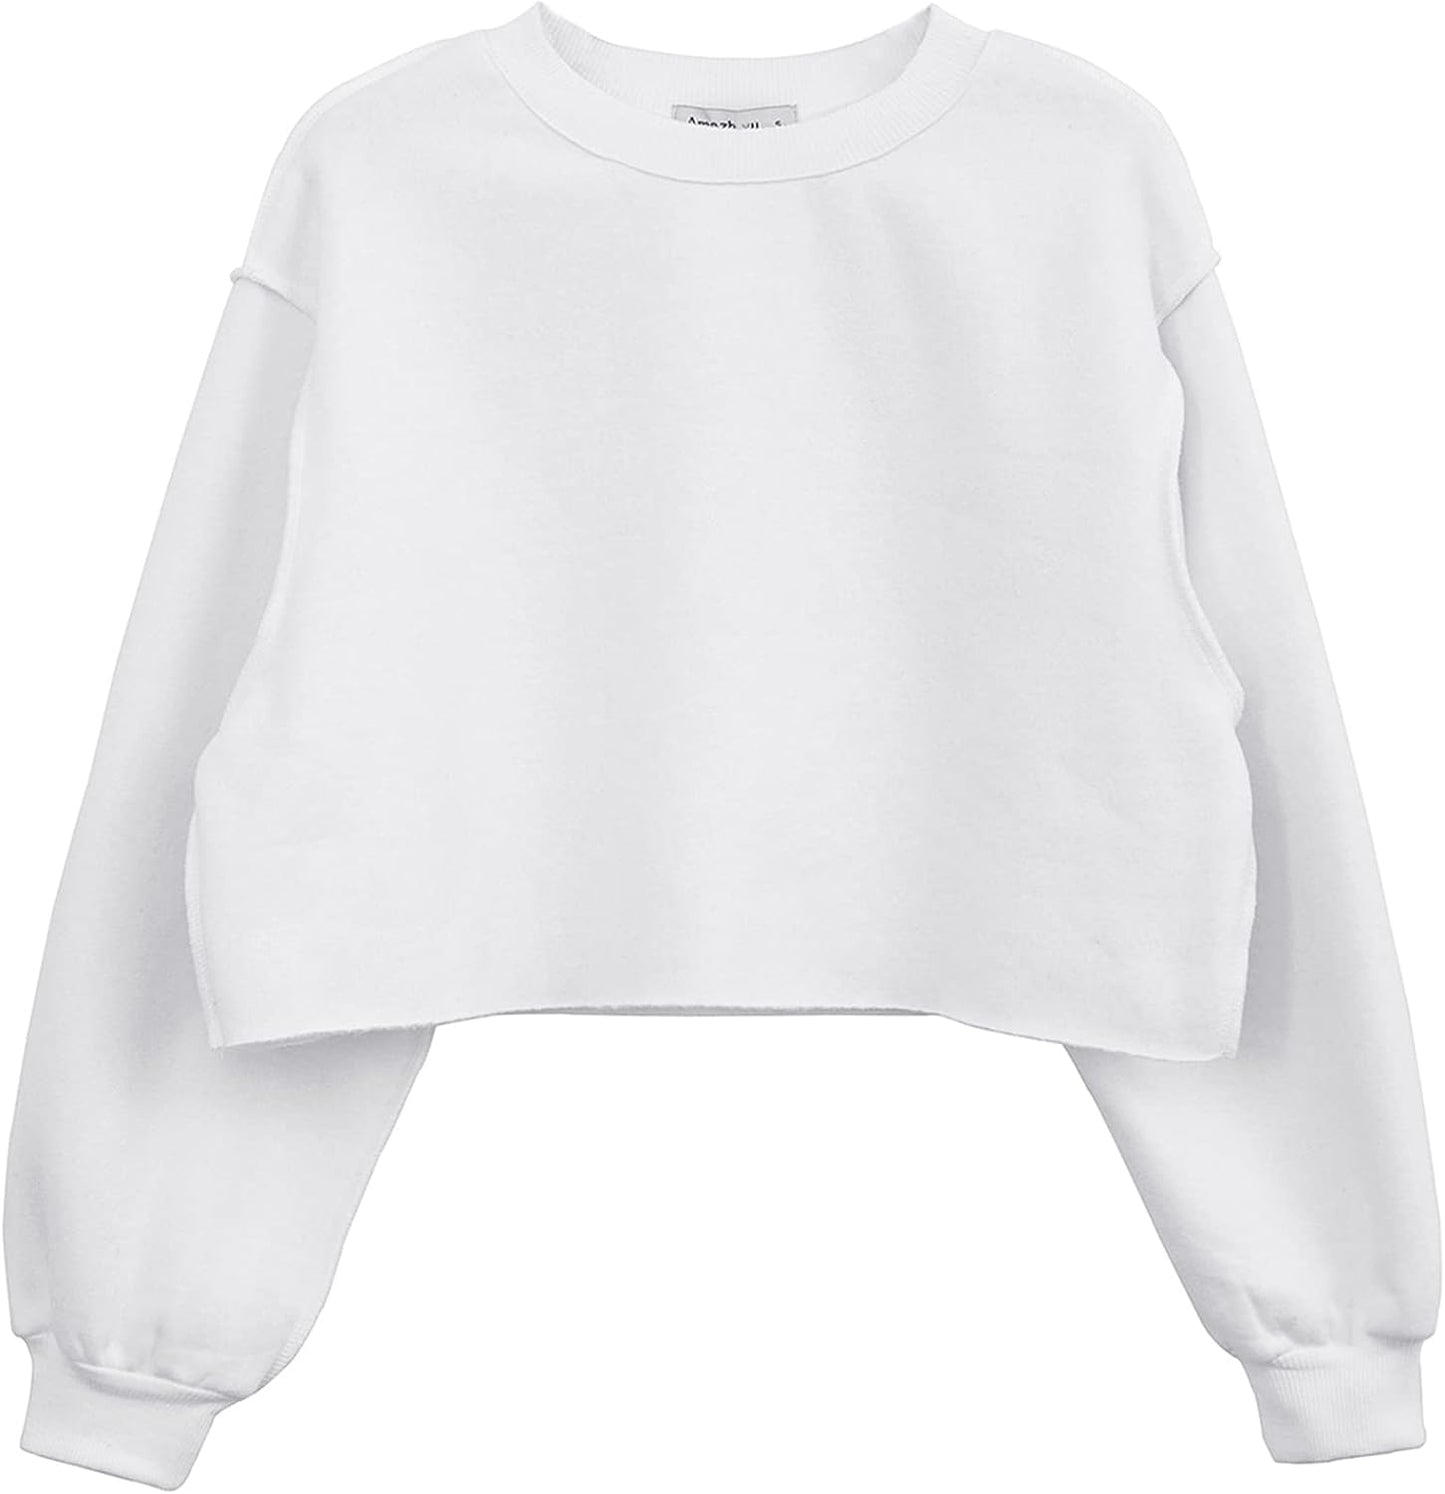 NTG Fad White / XX-Large Women Cropped Long Sleeves Pullover Fleece Crop Tops